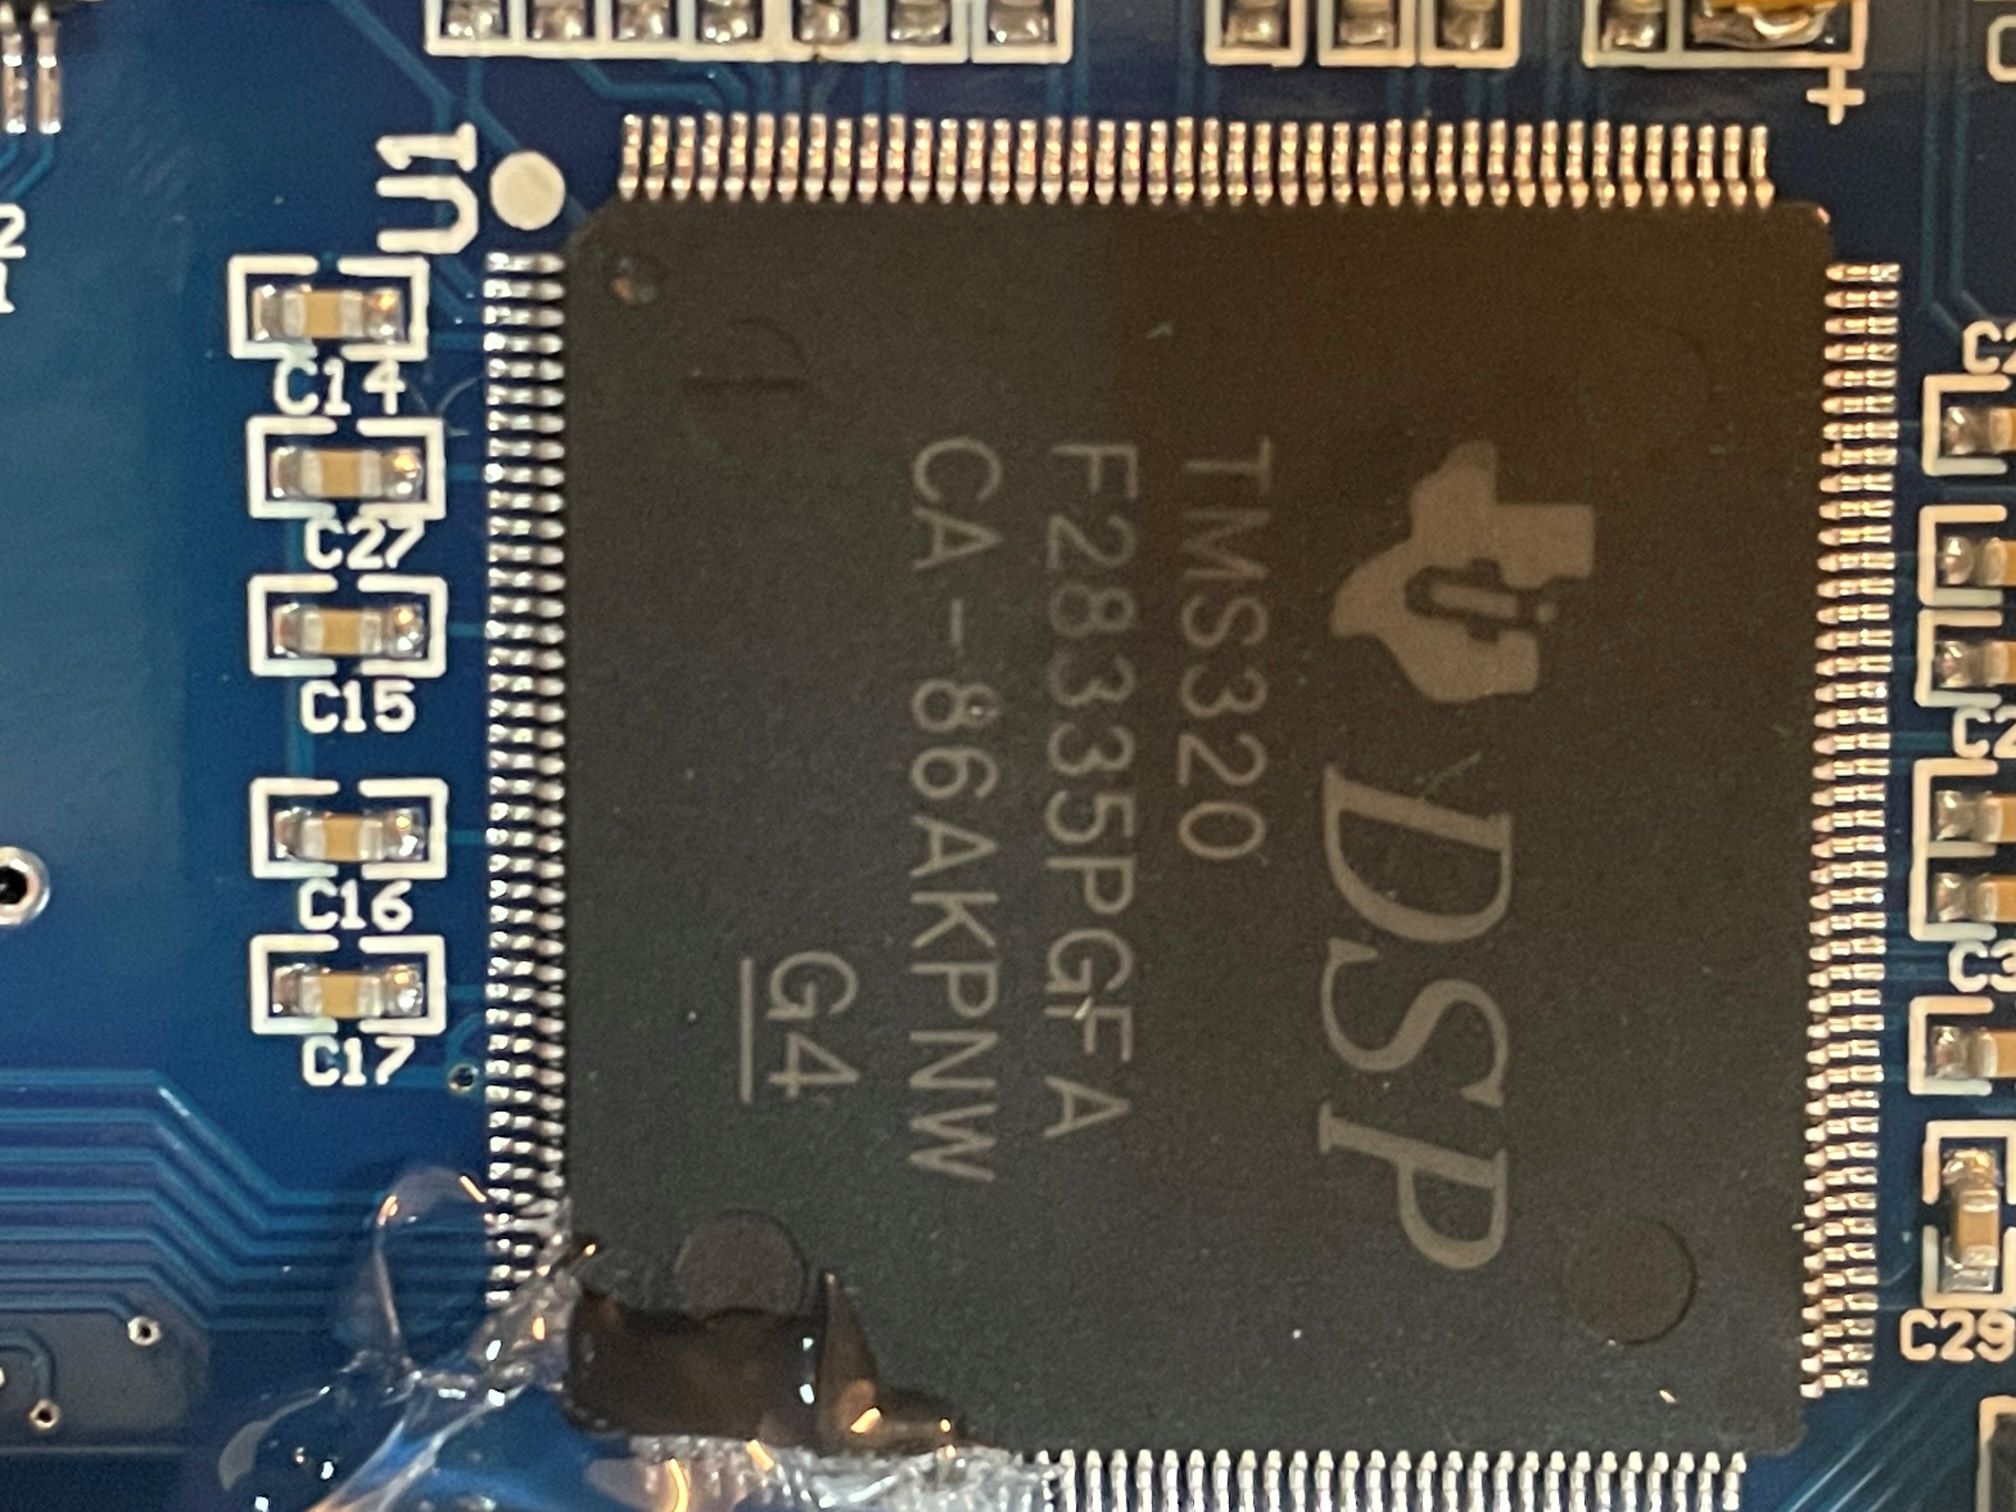 A real-time microcontroller with a connection manager